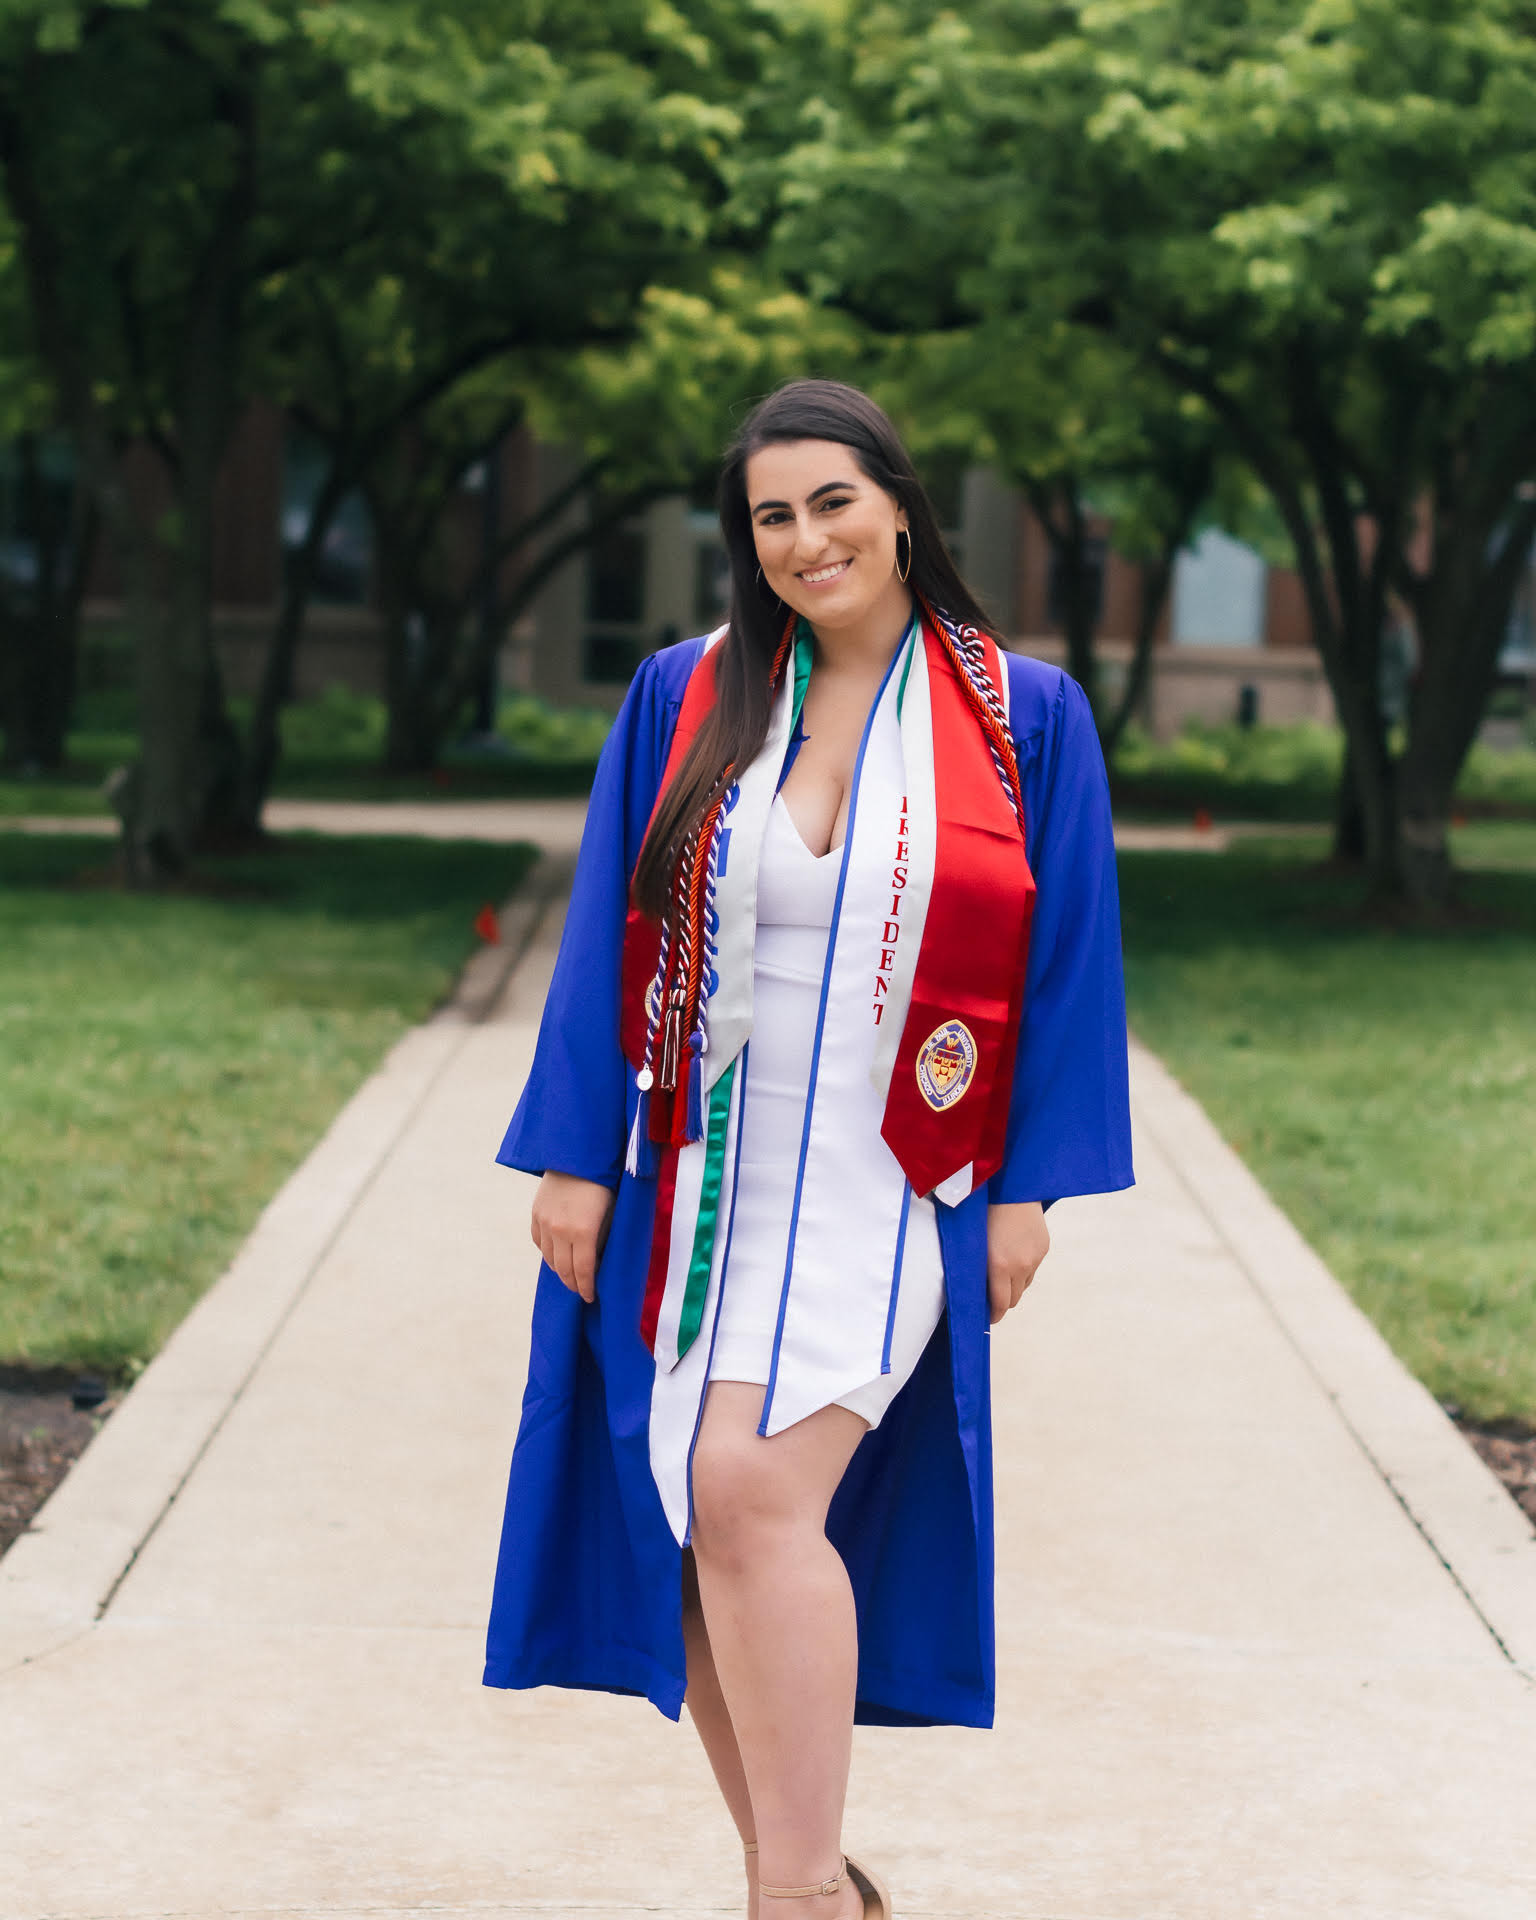 Thank you to everyone who has taught, mentored, and believed in me enough to help me reach today. I appreciate each and every single person at DePaul who has supported me in this journey. Cheers to new beginnings :)